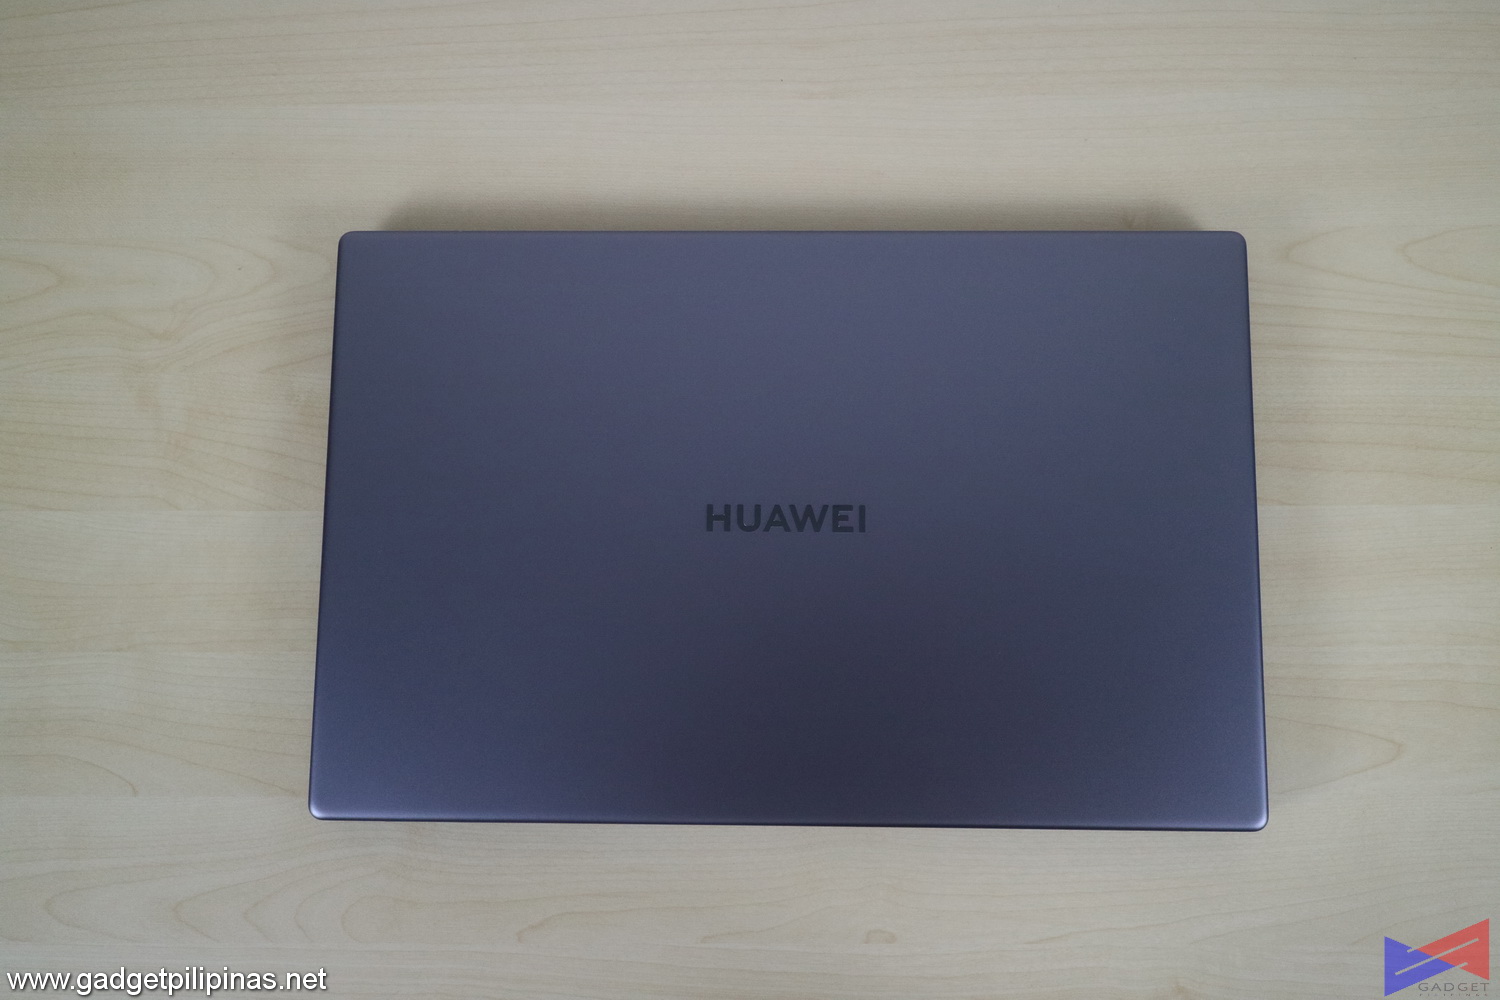 Huawei Matebook D 15 Review Build Quality